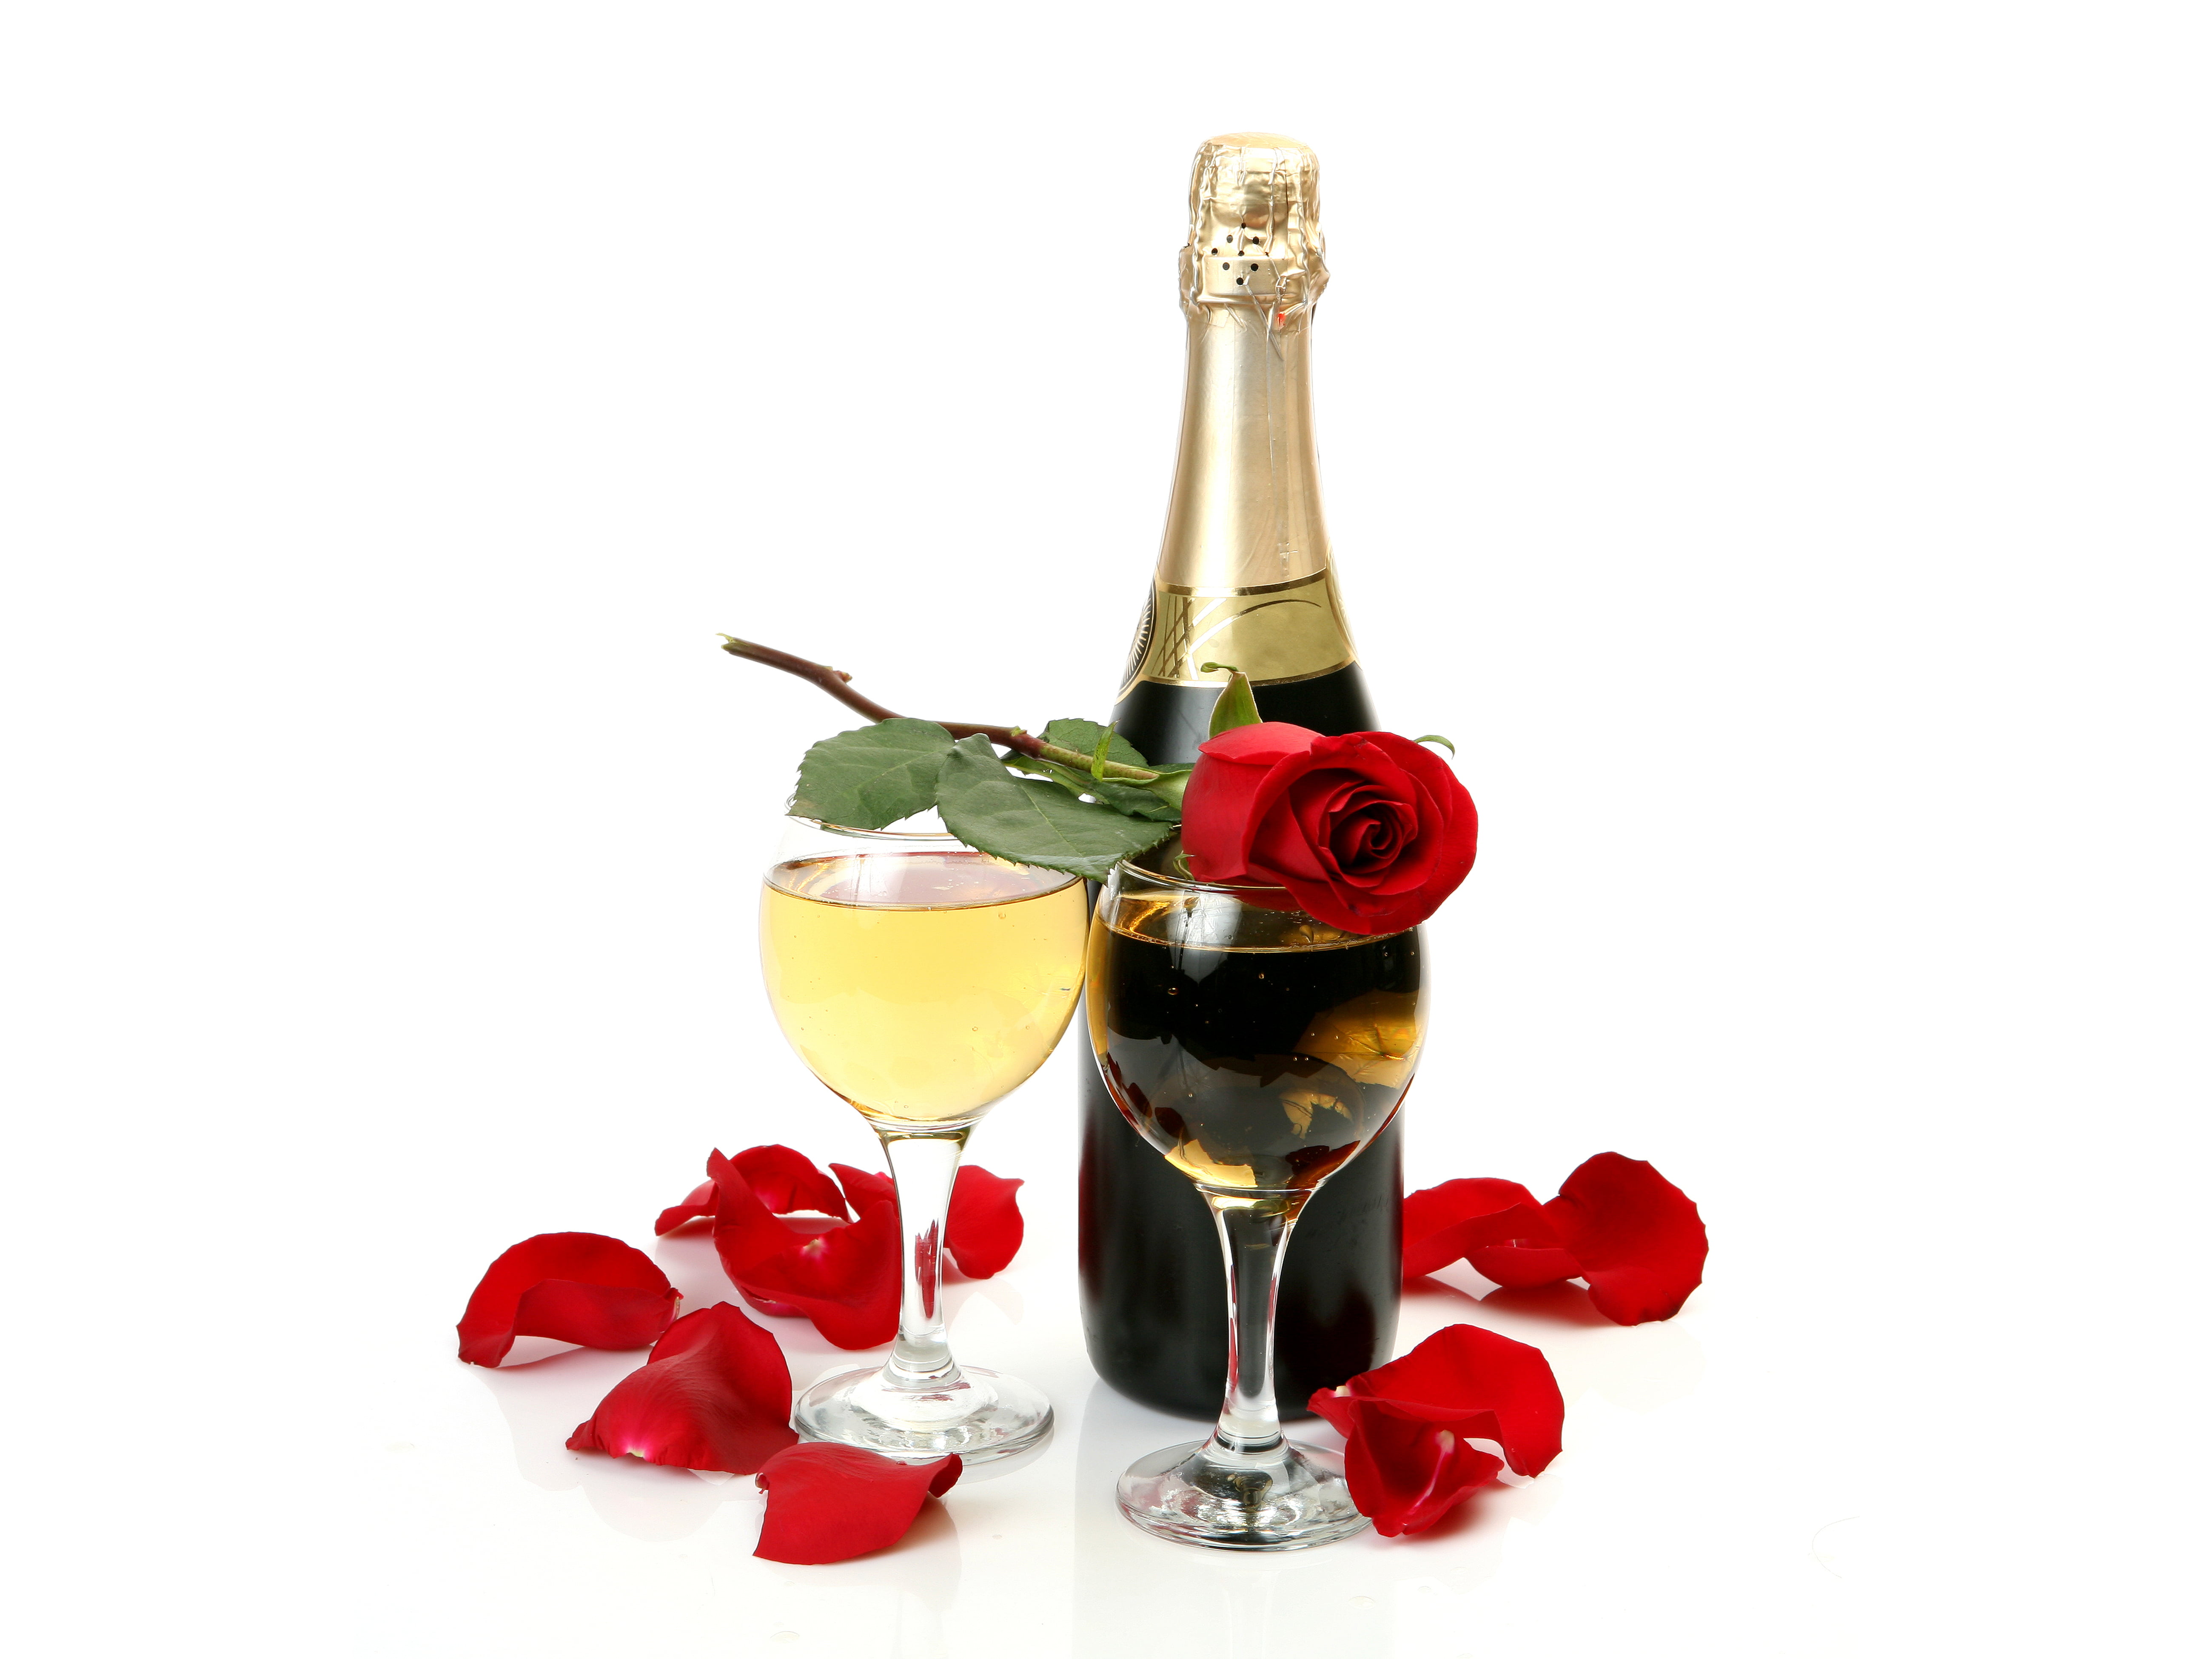 two clear glass wines, rose, bottle, petals, glasses, white background